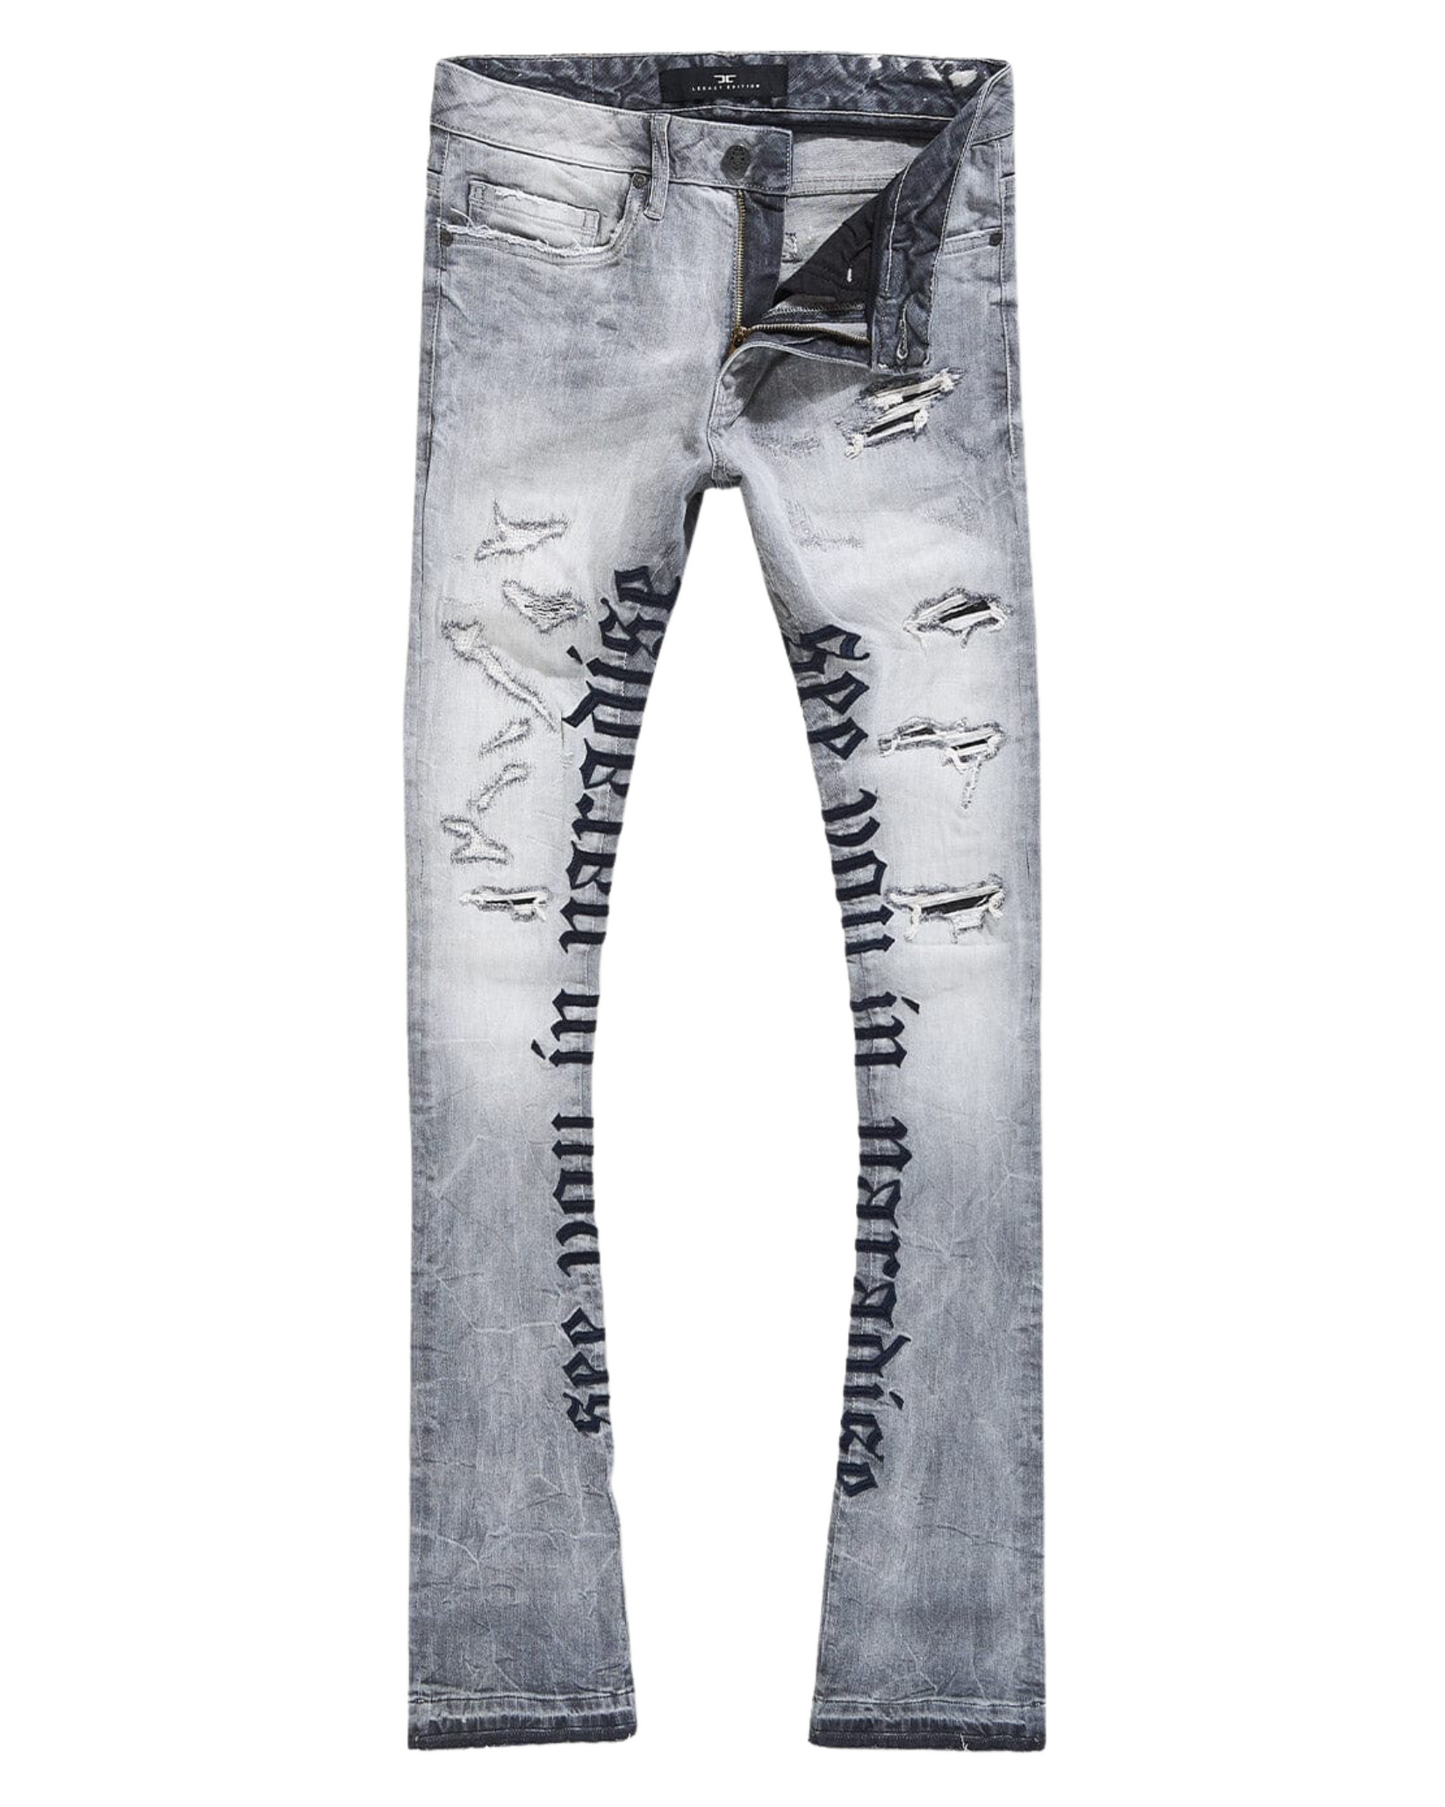 Martin See You In Paradise Stacked Jeans JTF1154